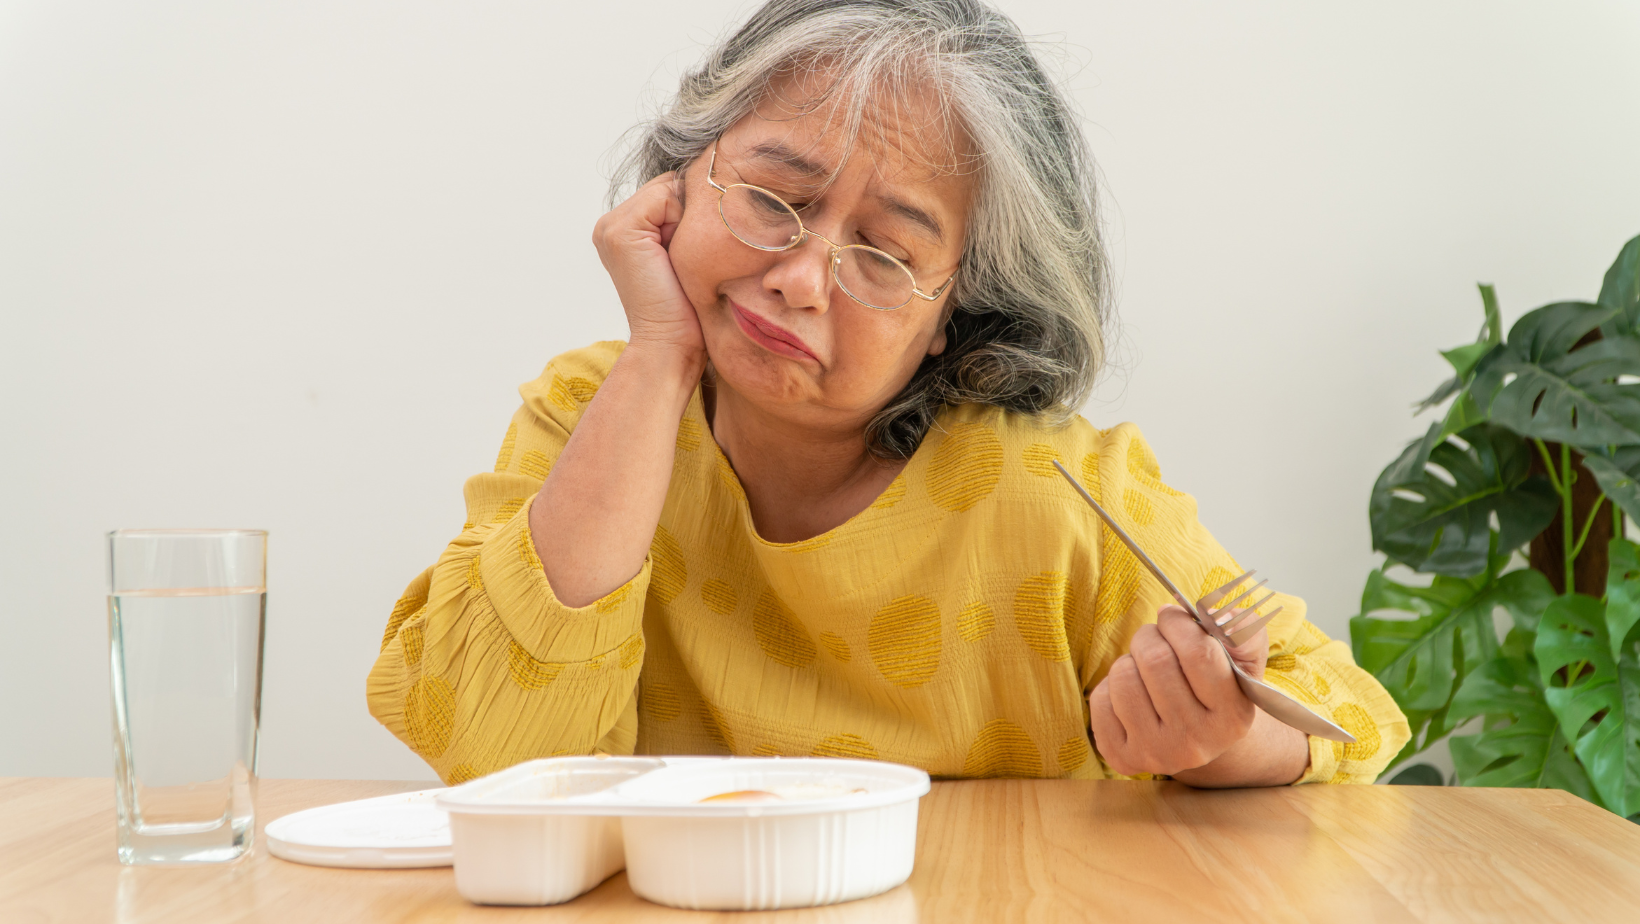 woman struggling to eat food with missing teeth